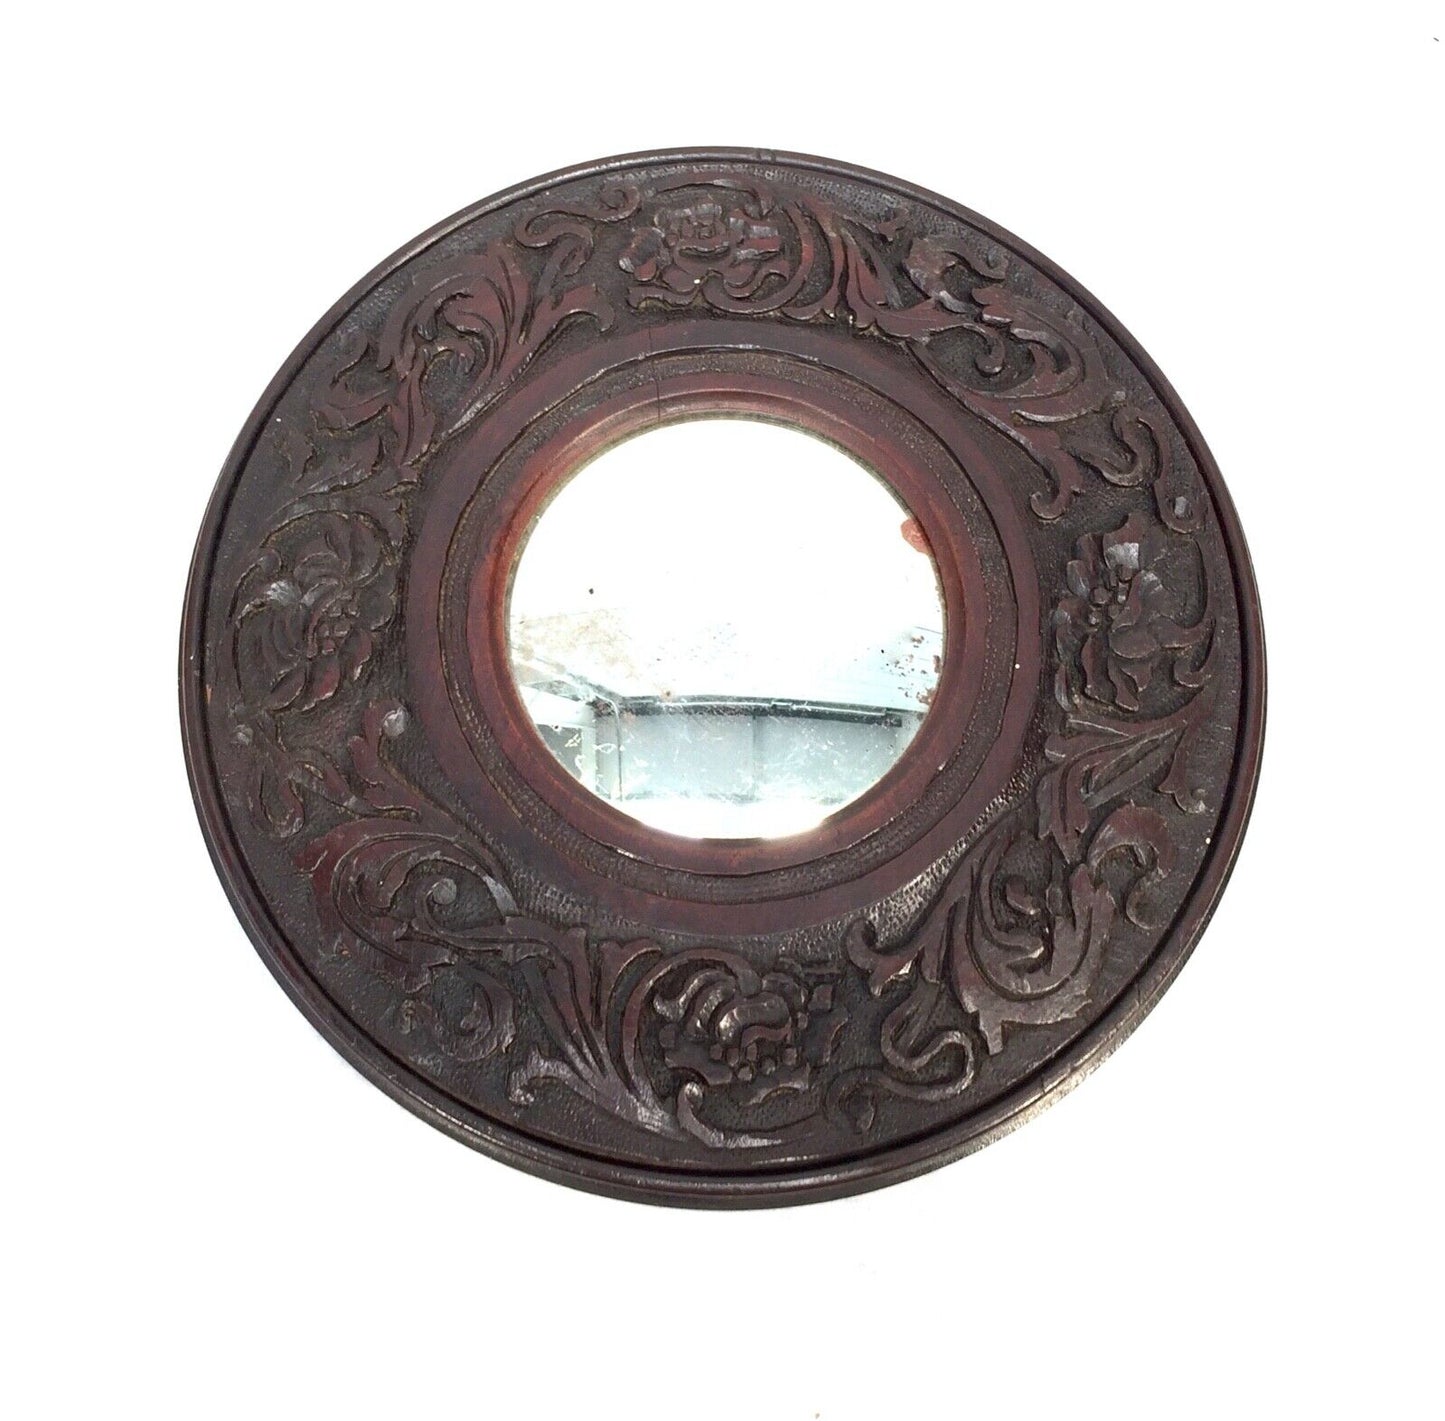 Antique Indian Hardwood Carved Cover Wall Mirror / Circular / Wall Hanging